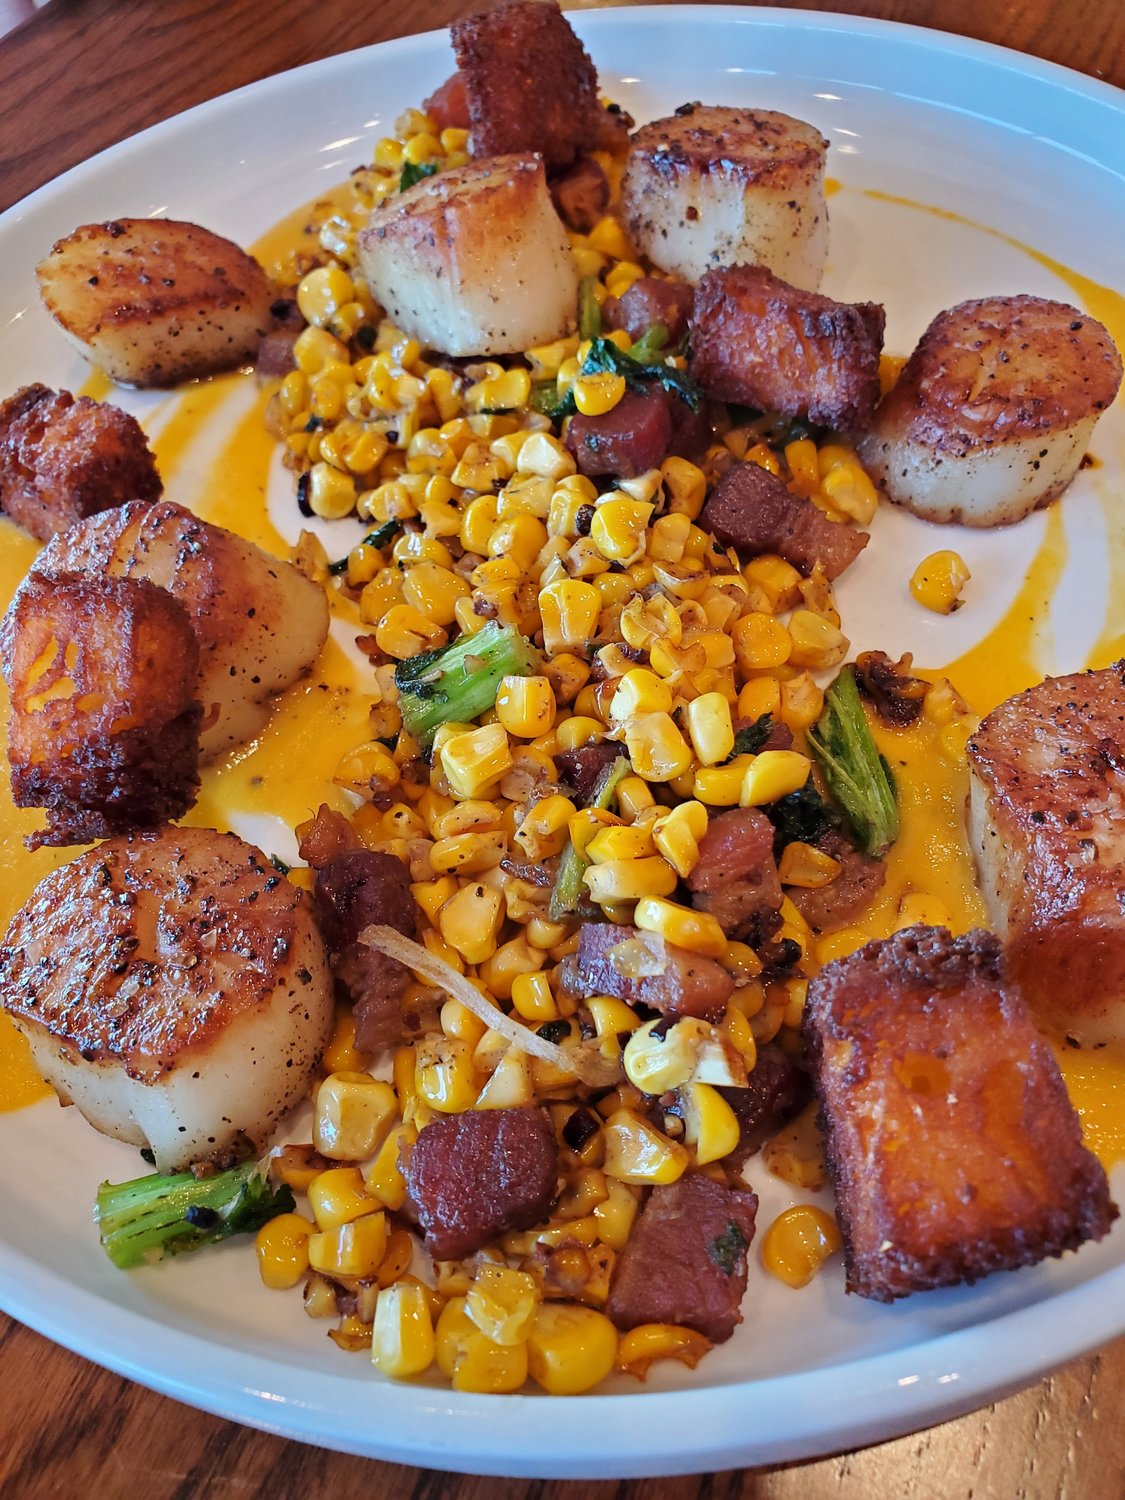 Chef Mike Cooney’s unique interpretation of scallops this season features corn: seared scallops with sweet corn puree, chewy roasted fresh corn, crispy cubed corn bread, mustard greens and bacon lardon.